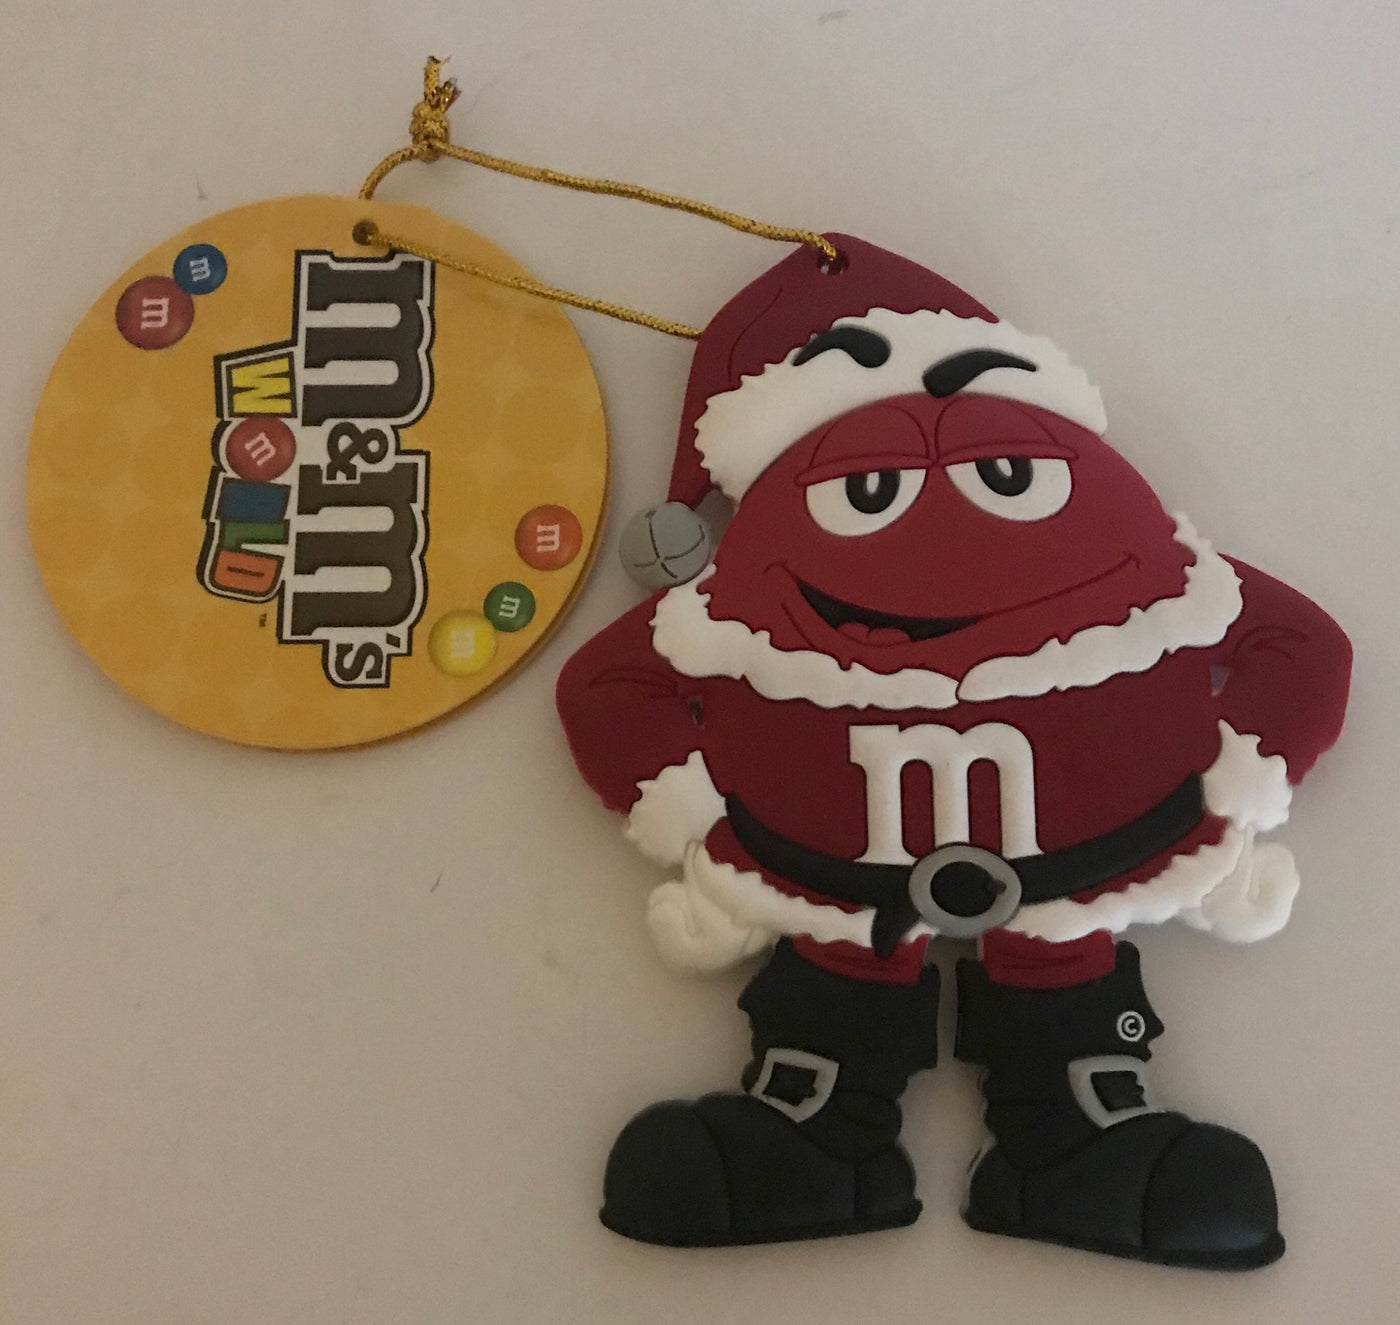 M&M's World Christmas Ornament Red Santa New with Tag